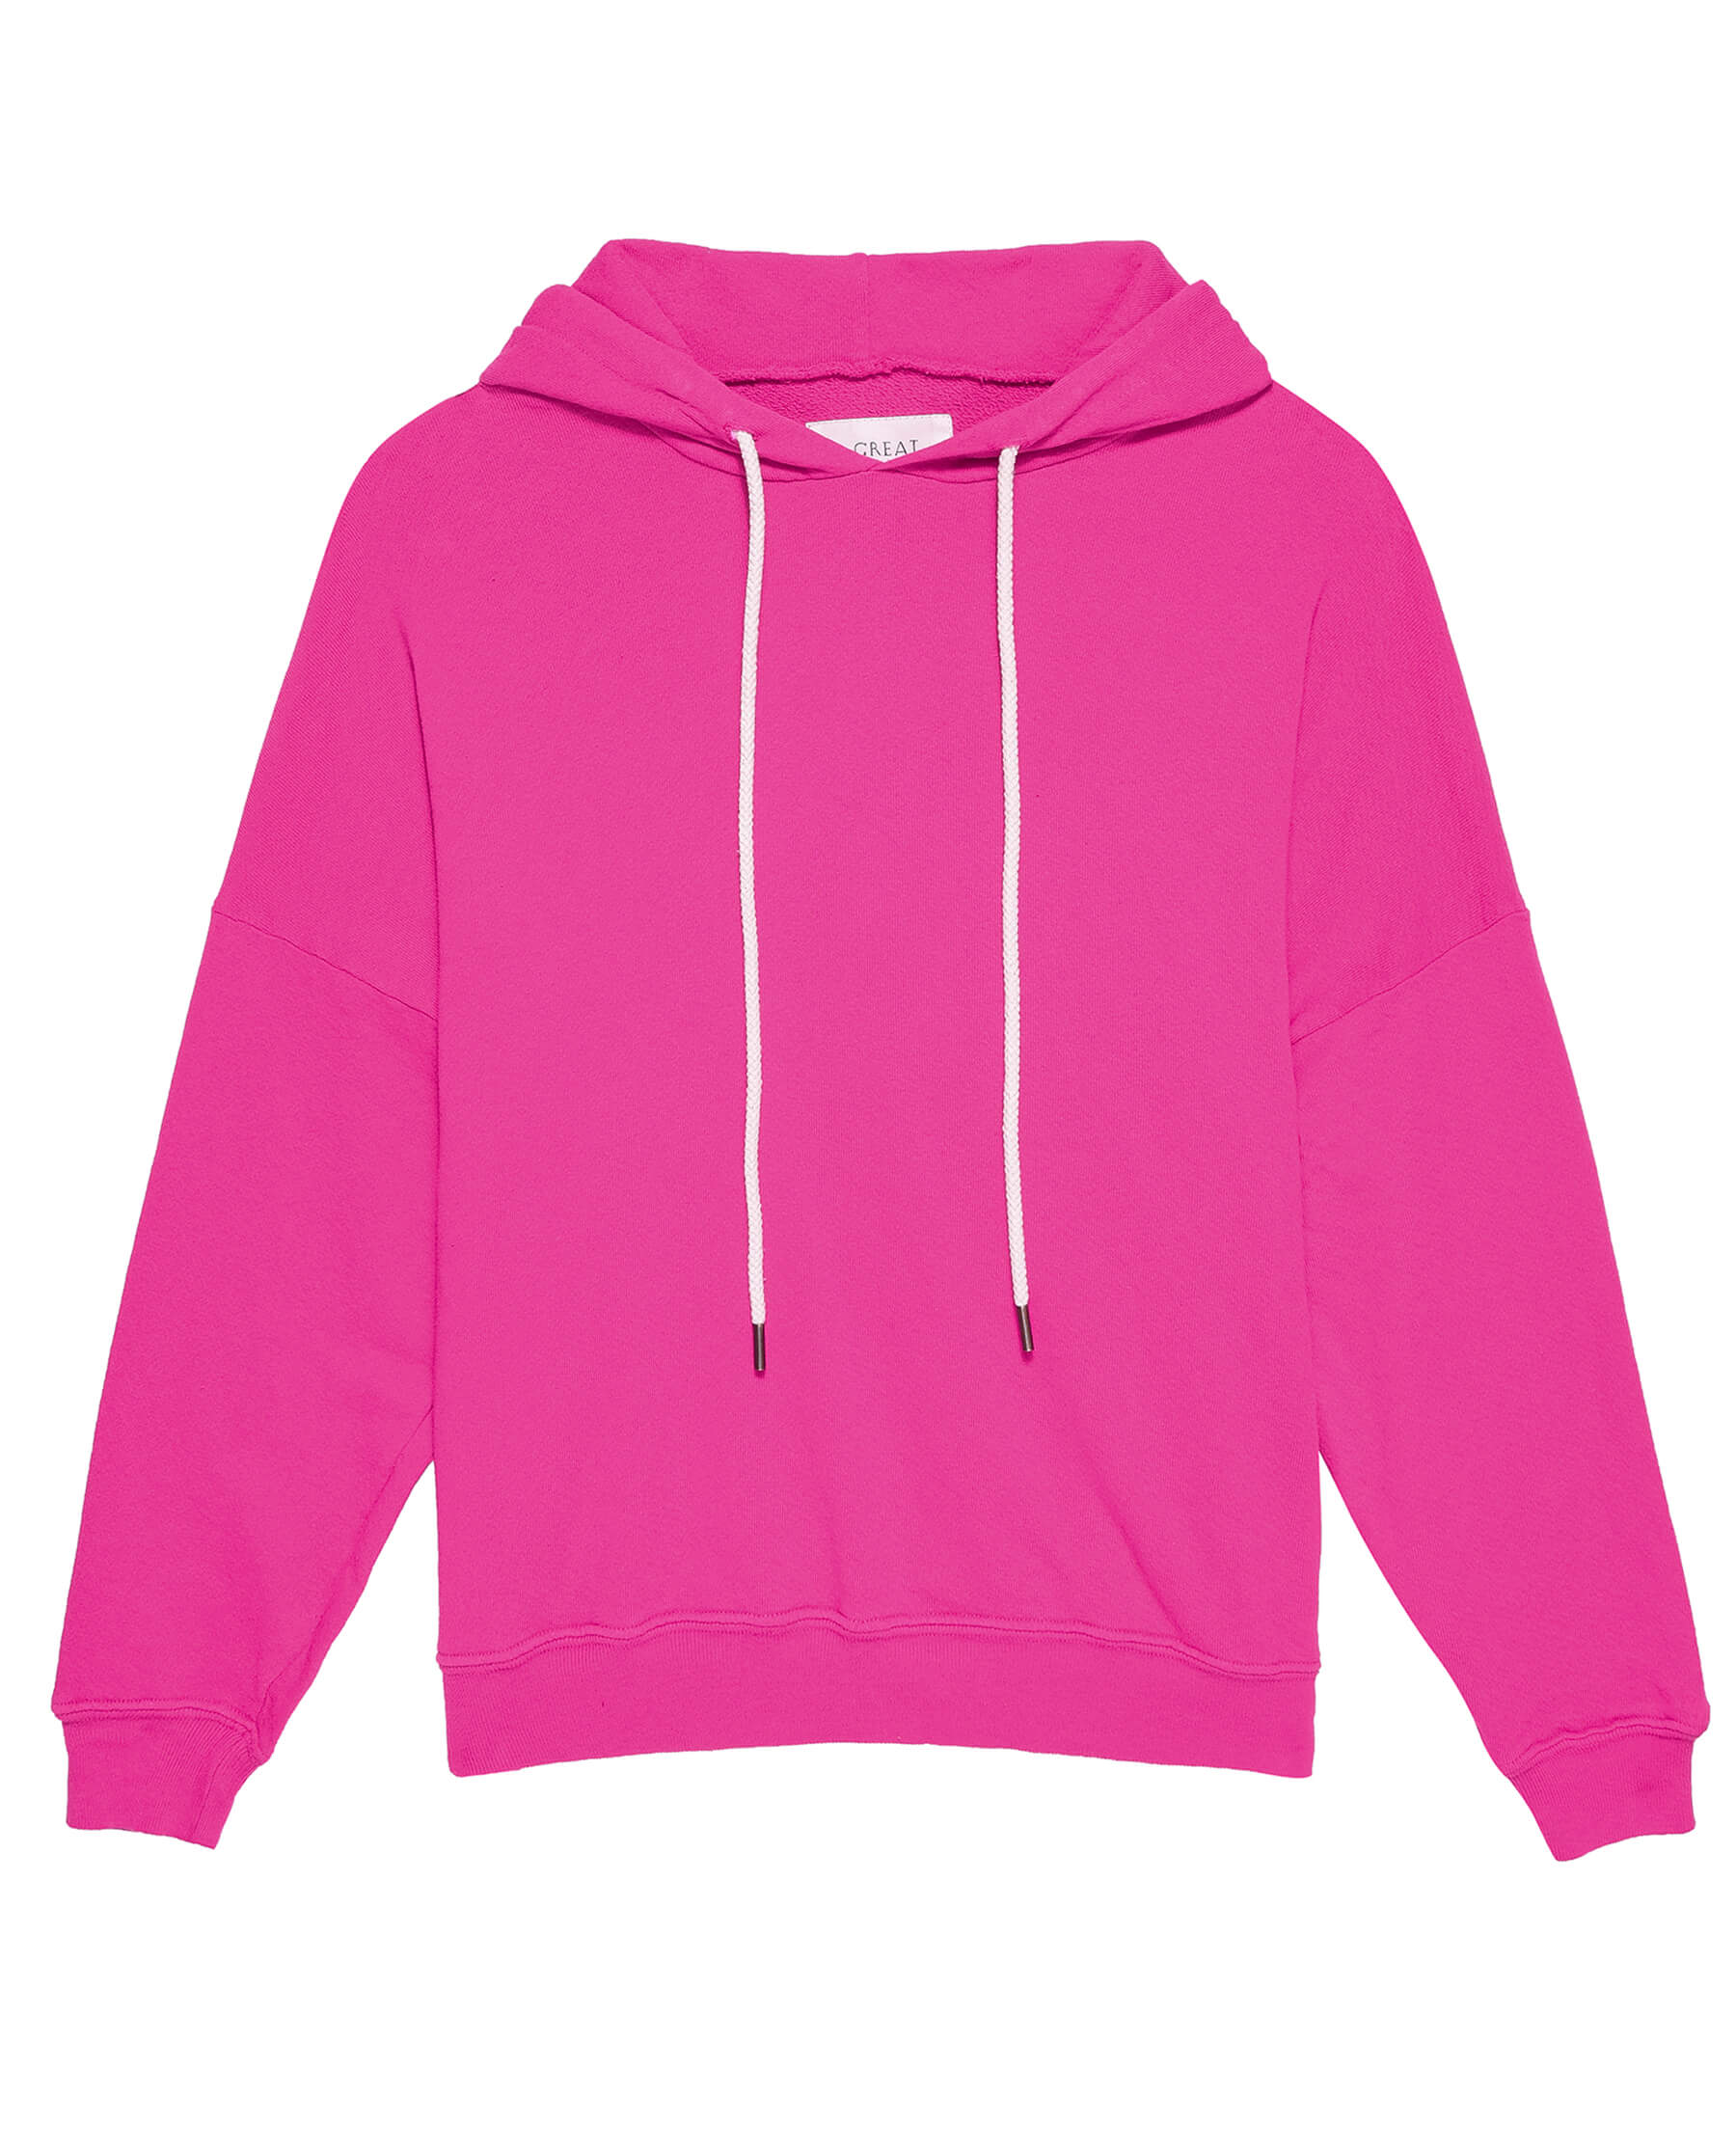 The Teammate Hoodie. Solid -- Fuchsia SWEATSHIRTS THE GREAT. HOL 23 KNITS